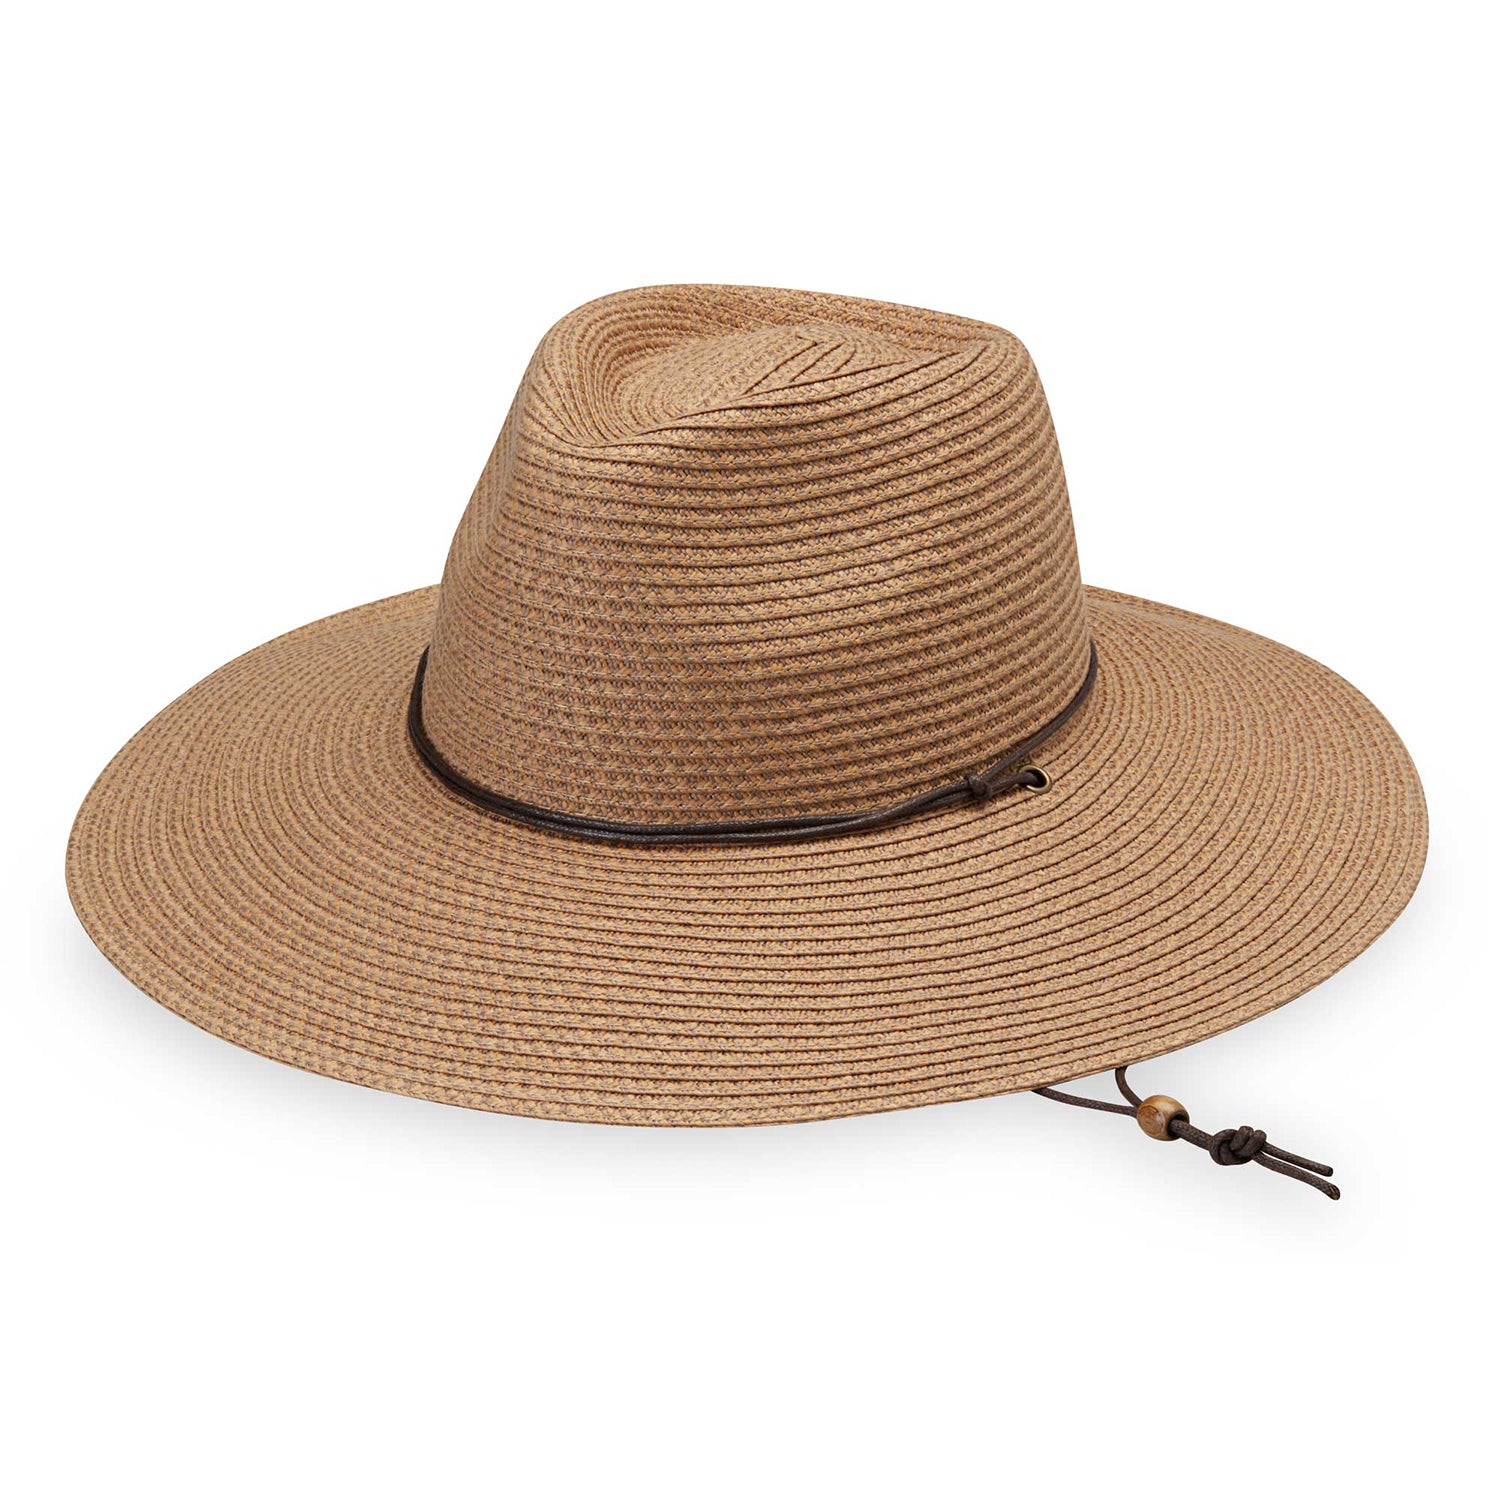 Featuring Wide brim Sanibel sun hat with chinstrap and made with packable, UPF 50 material